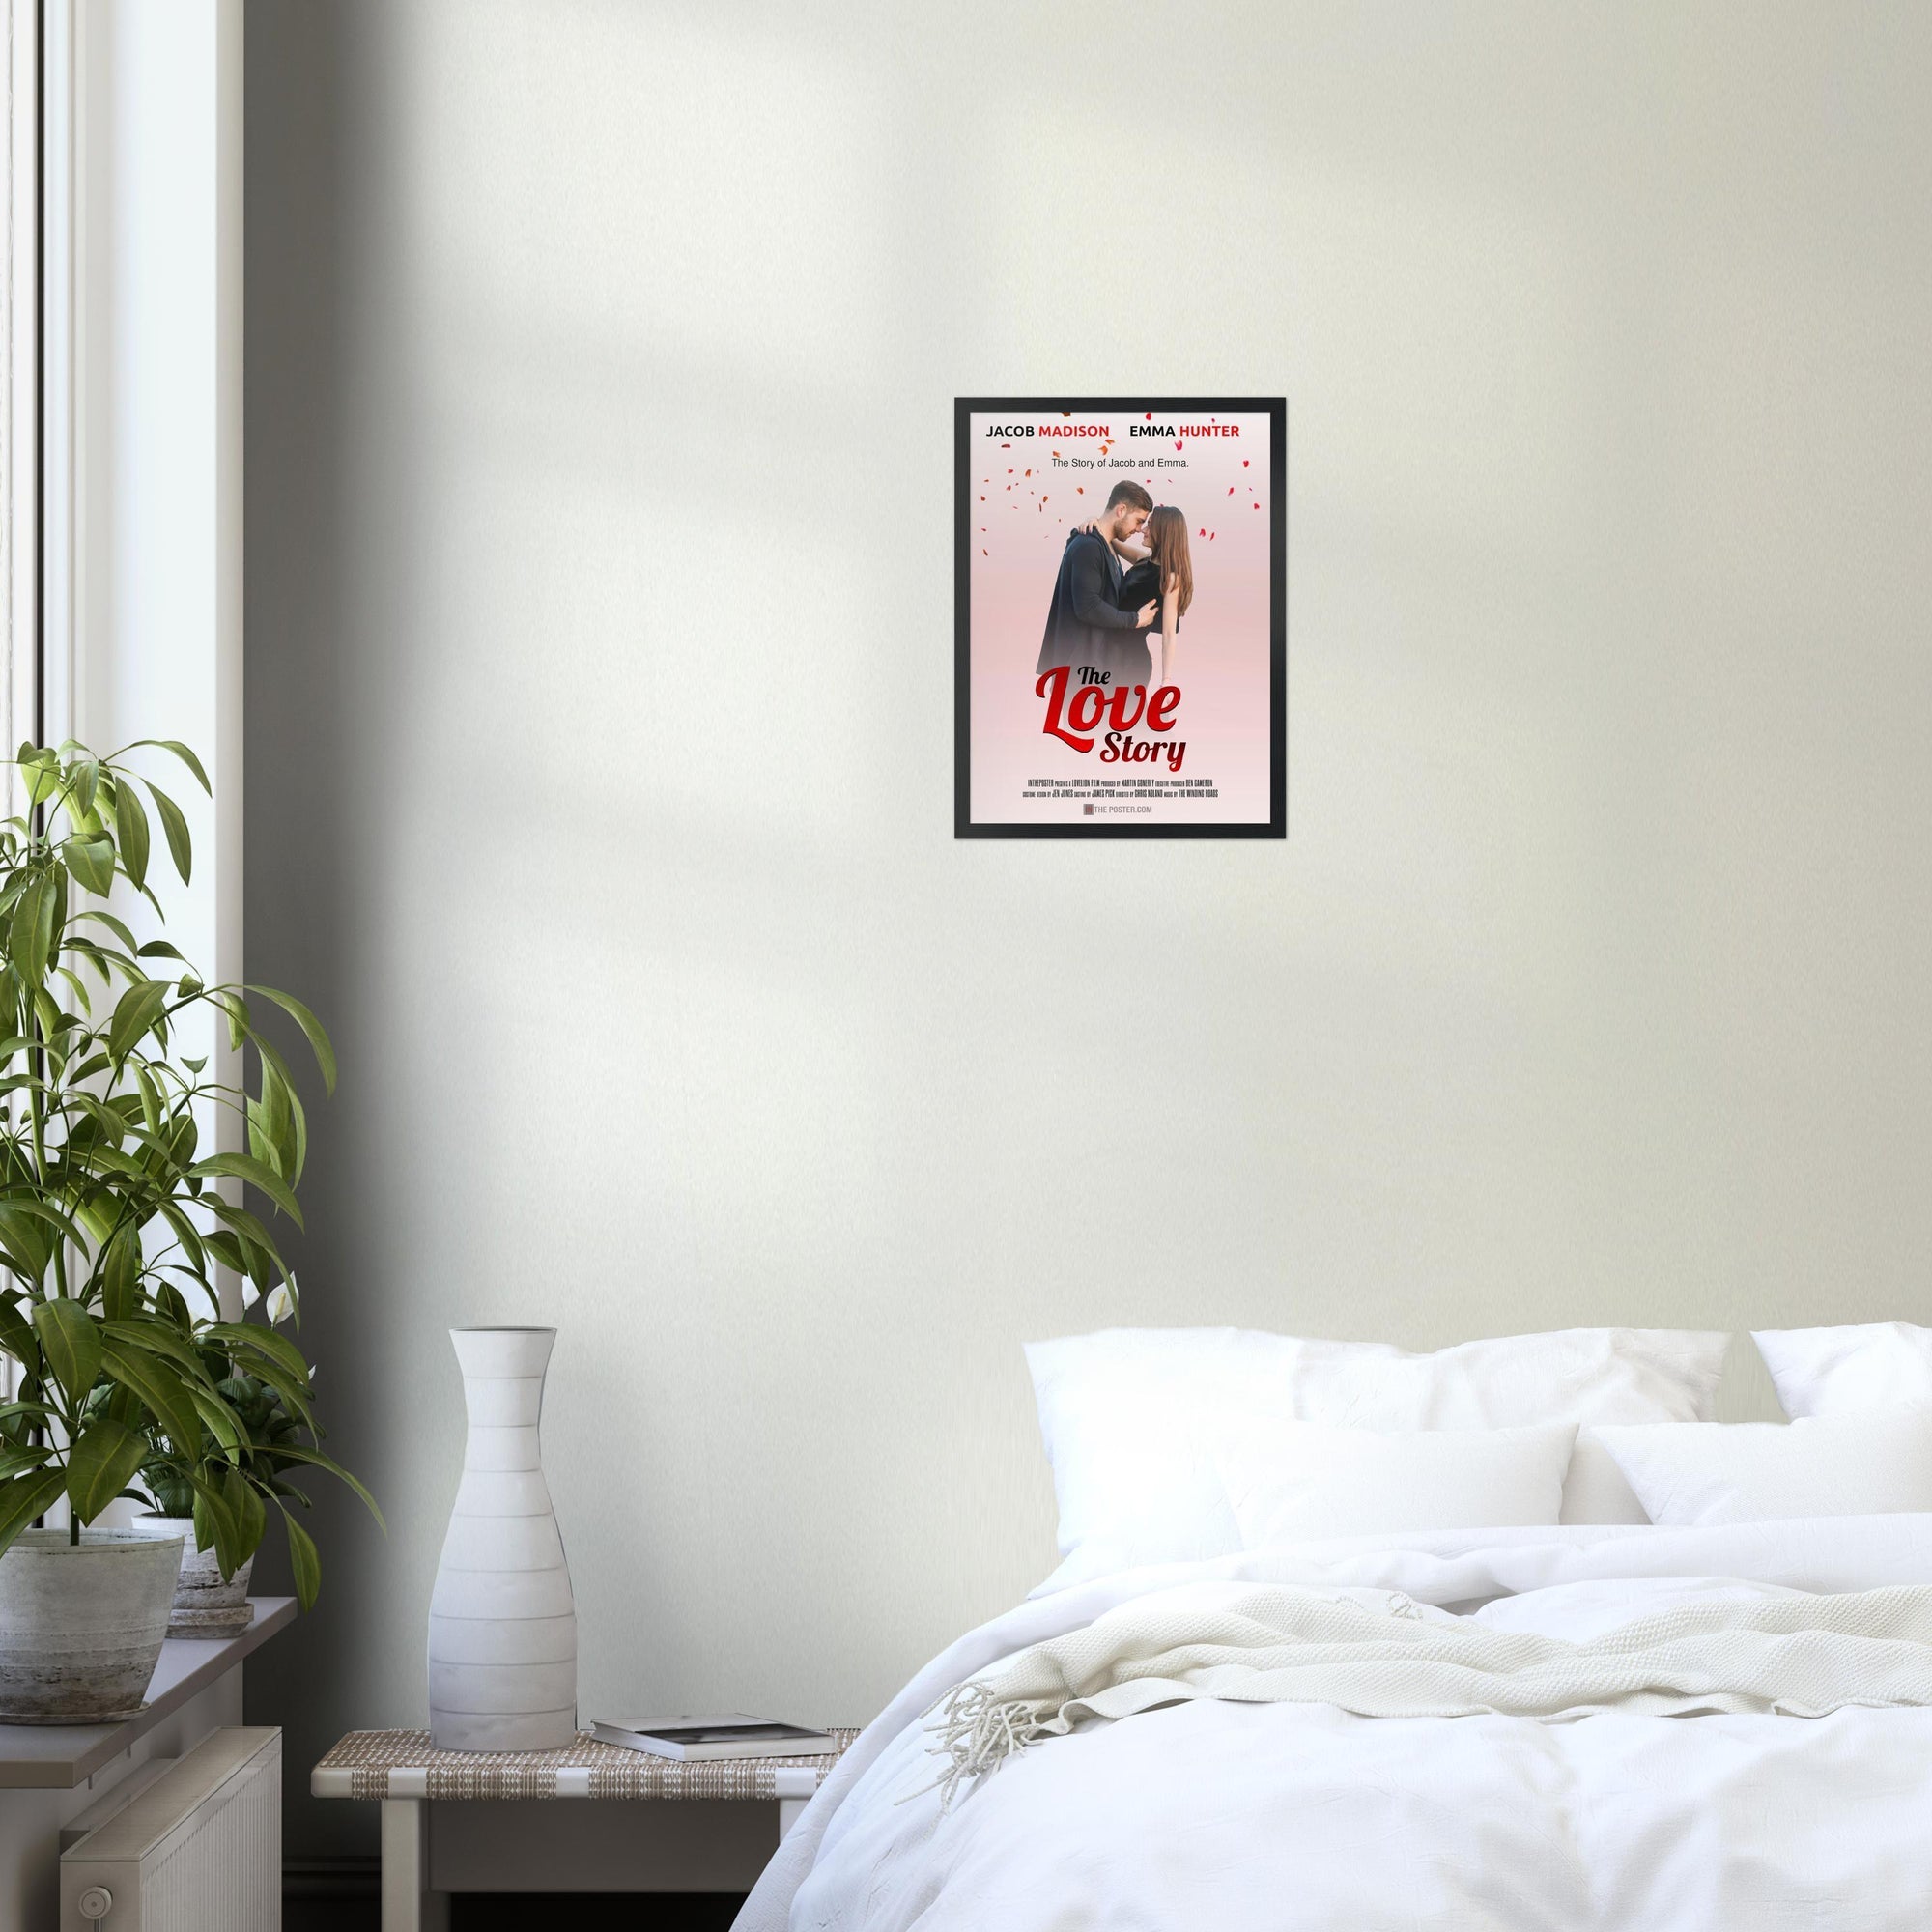 A bedroom wall with a small black frame with a film poster called The Love Story